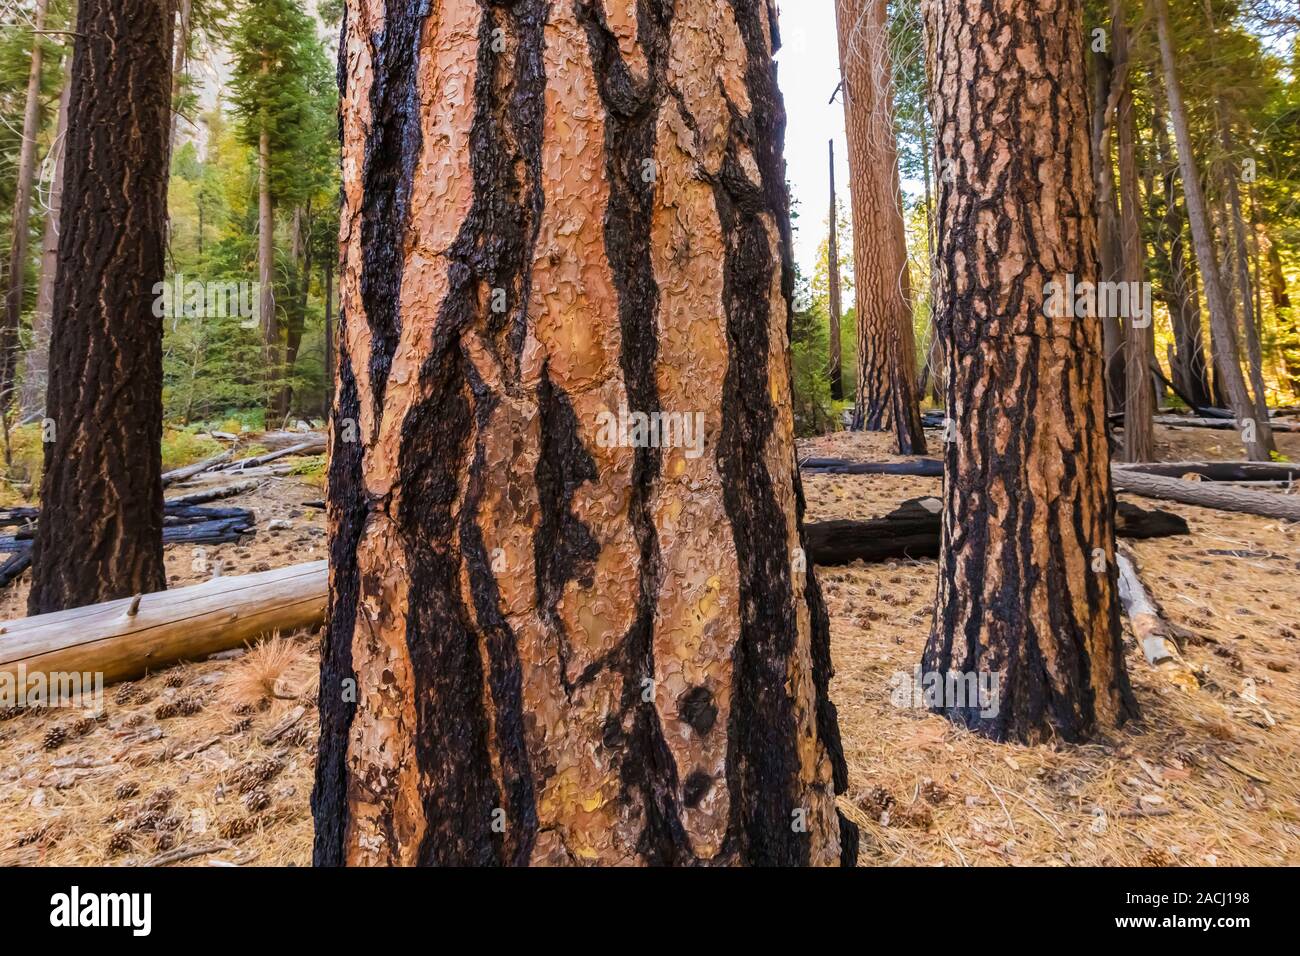 Ponderosa Pines, Pinus ponderosa, burned at least once in a forest fire, in the Cedar Grove area of Kings Canyon National Park, California, USA Stock Photo